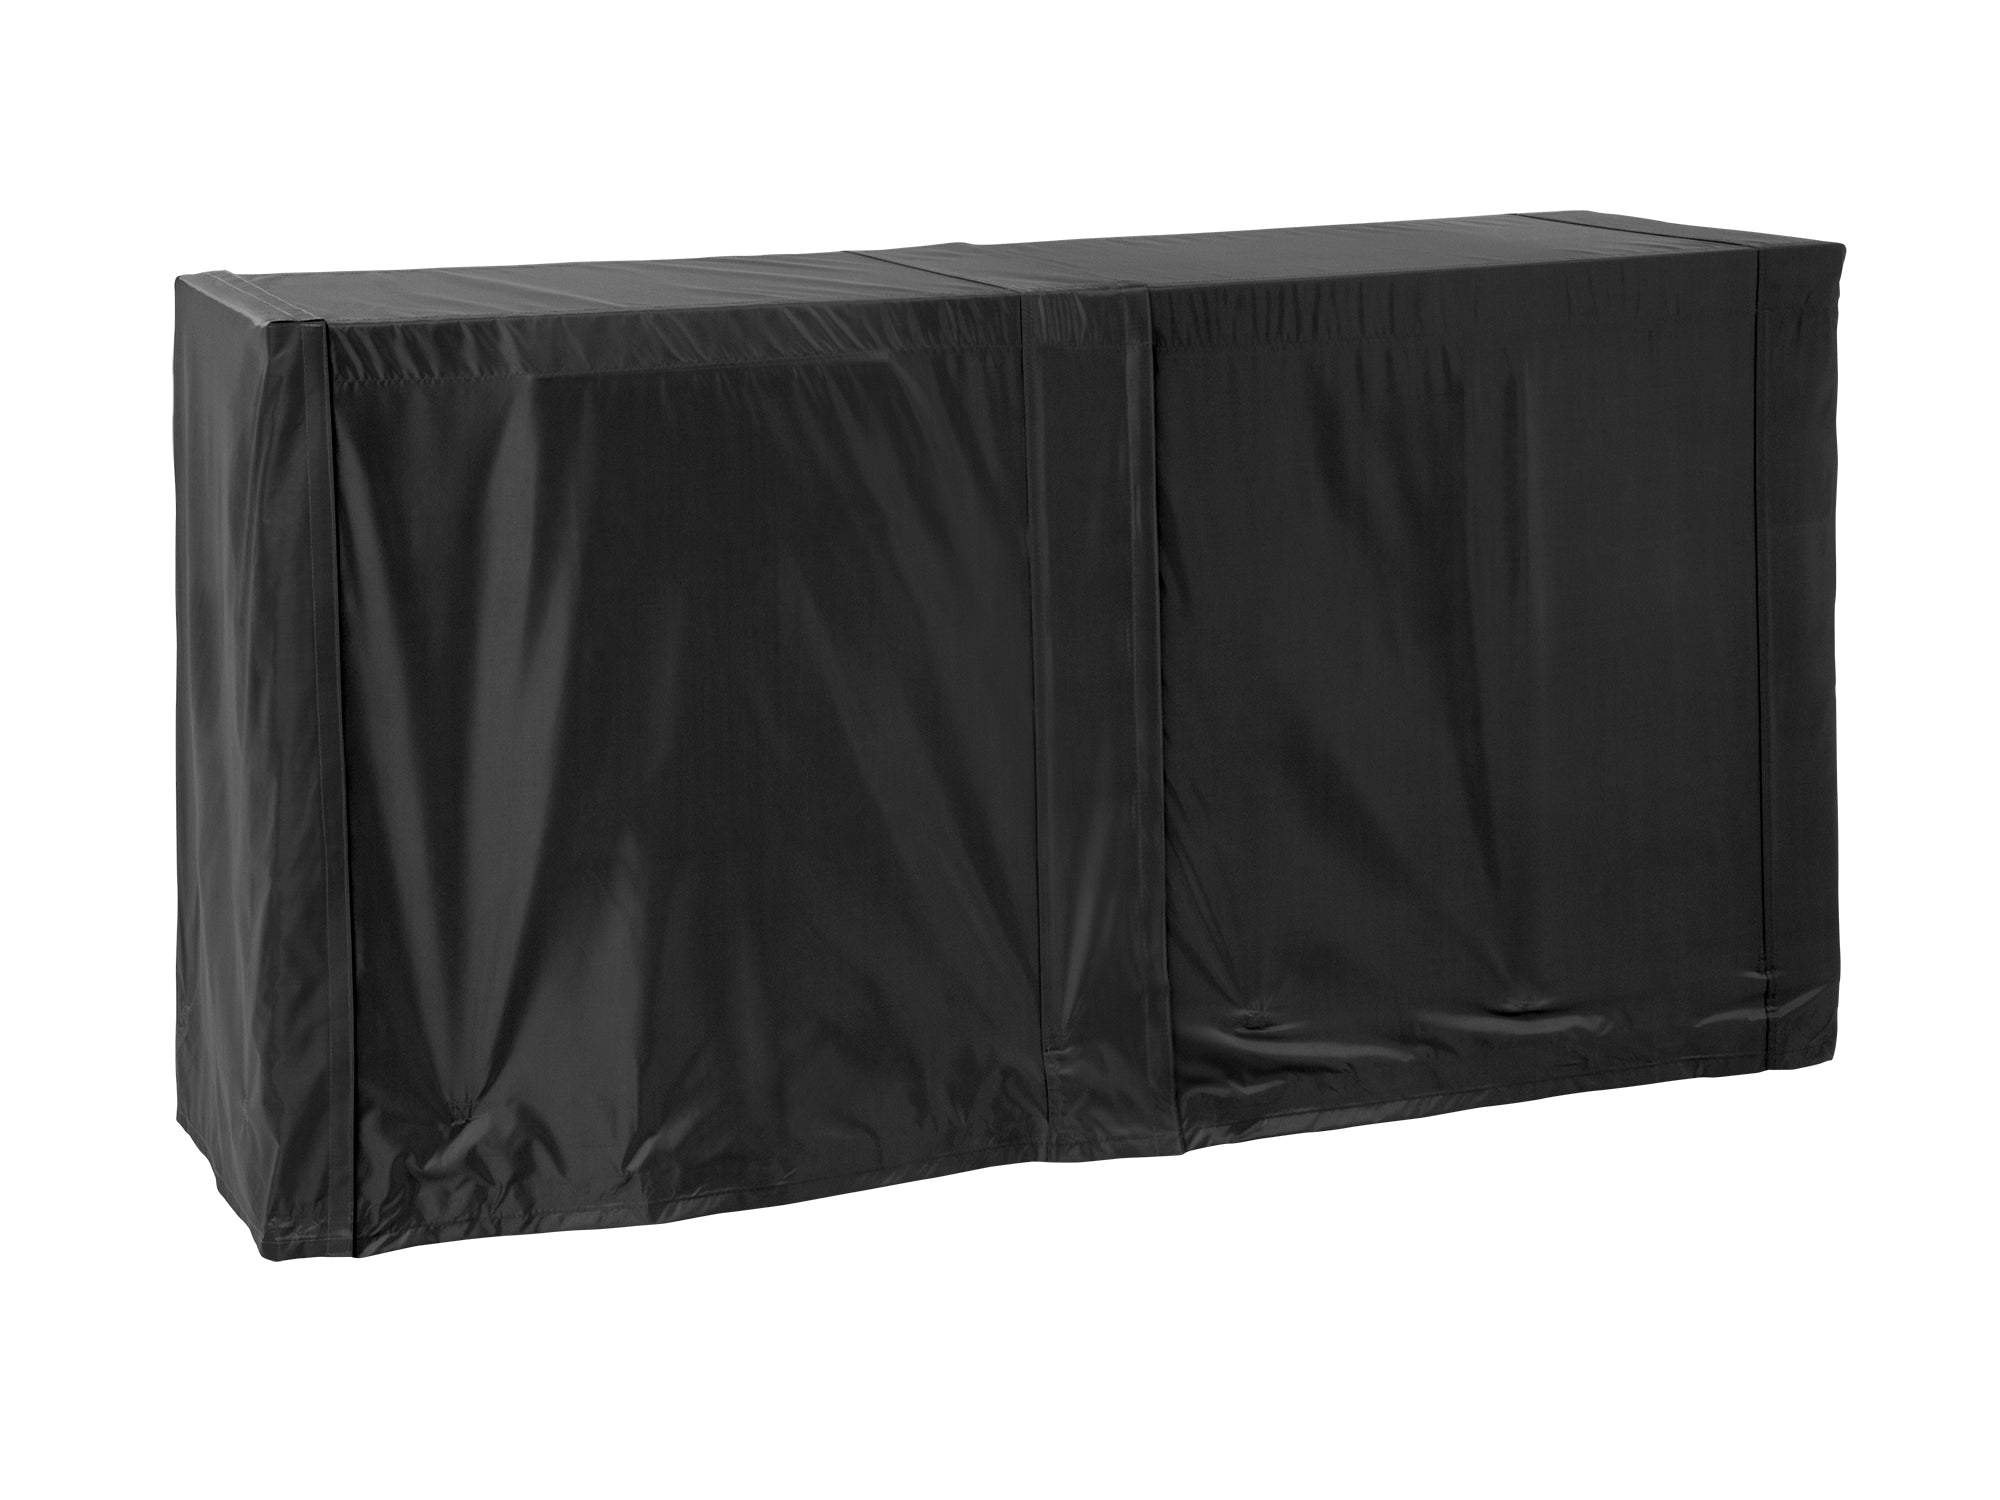 Outdoor Kitchen All-Season Cover Bundle: 96 in. Cover, Right/Left Side Panel Covers